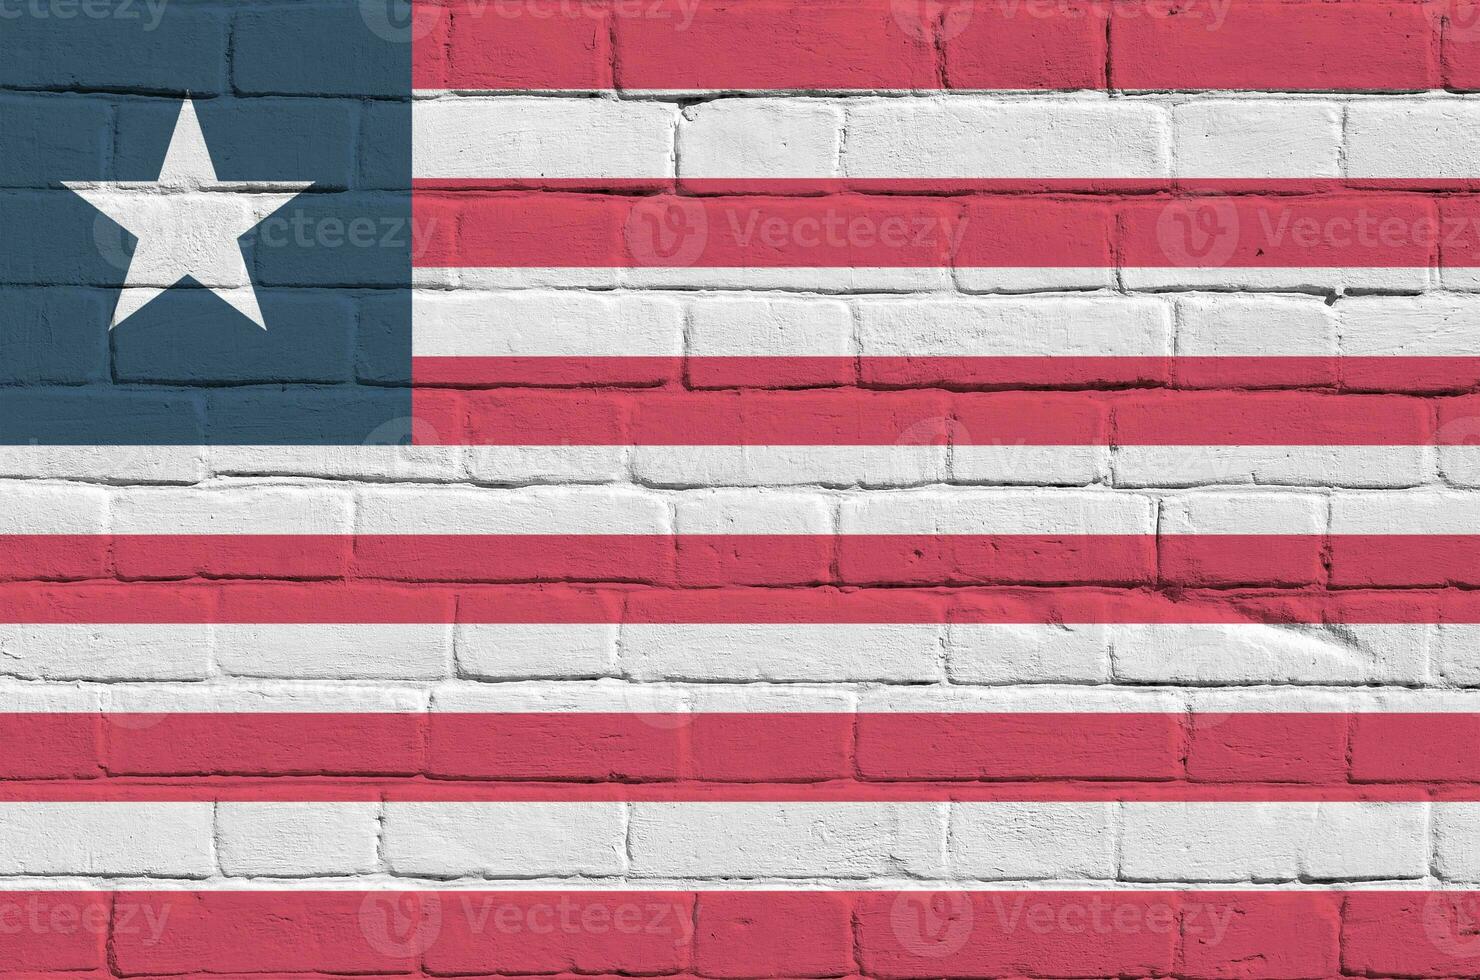 Liberia flag depicted in paint colors on old brick wall. Textured banner on big brick wall masonry background photo